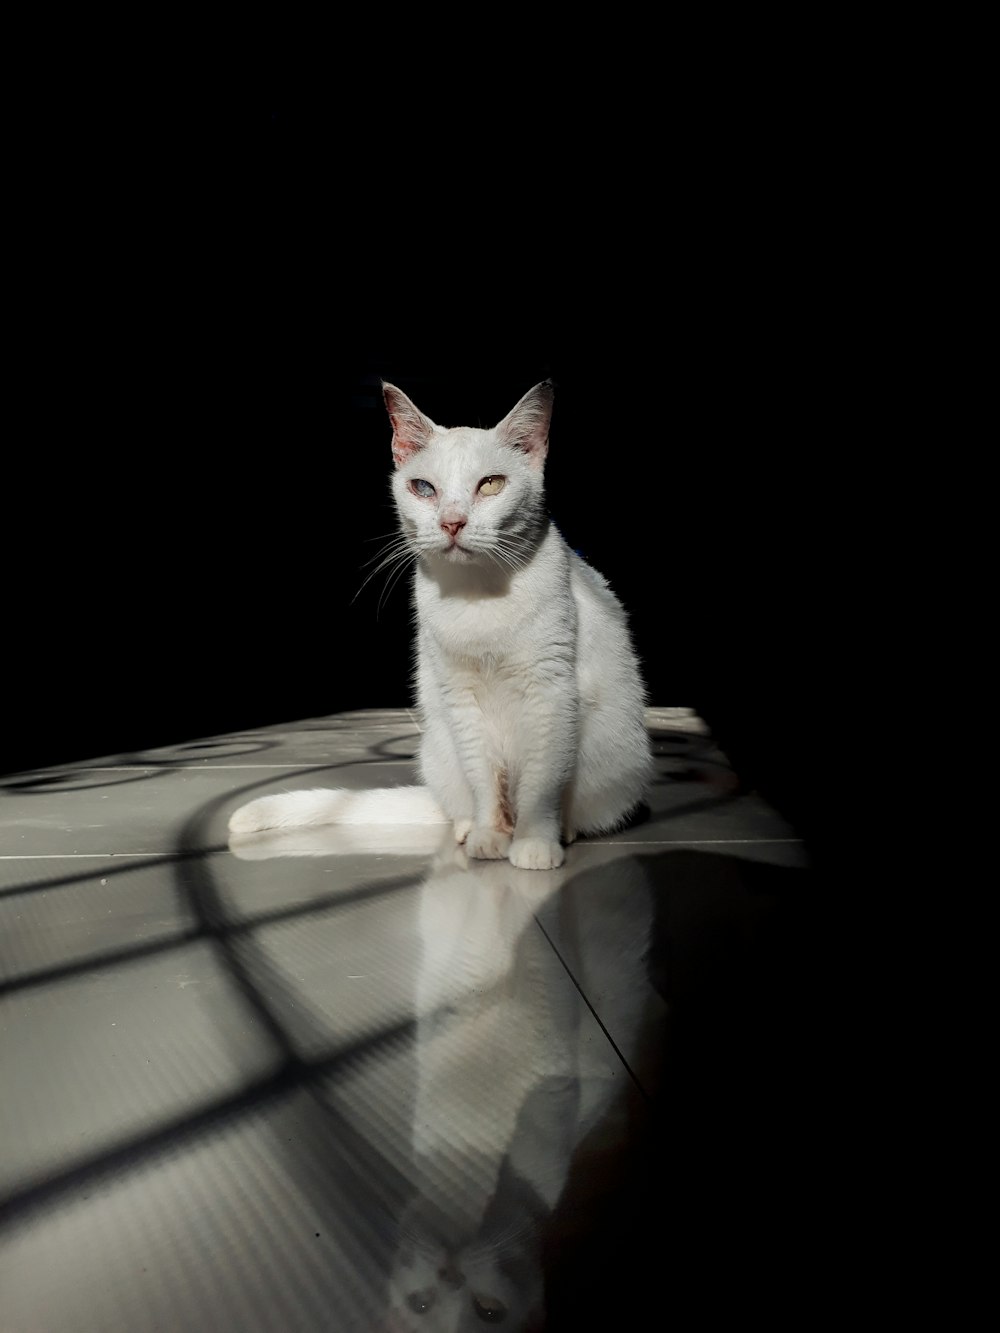 white cat on brown wooden table